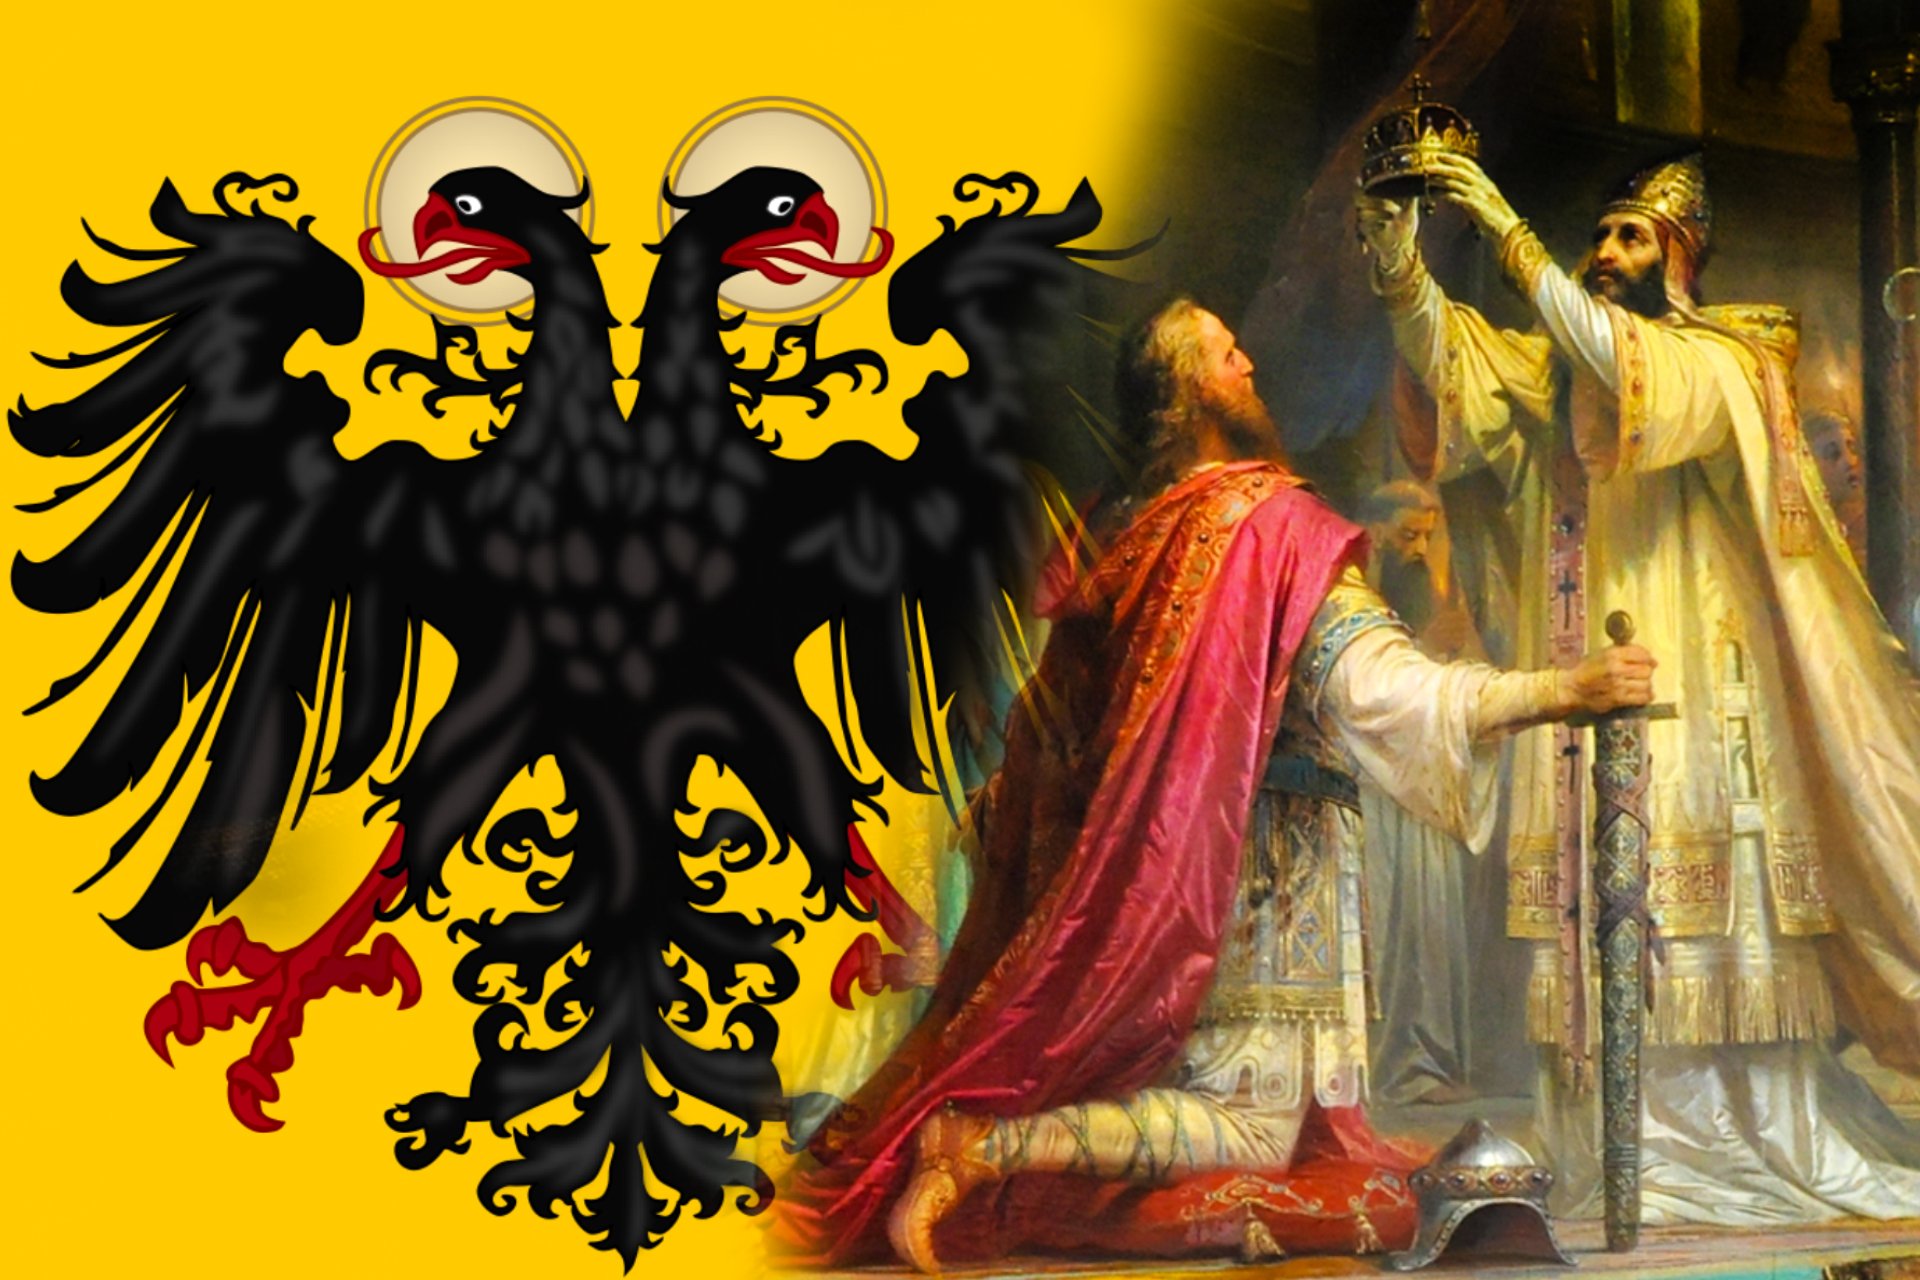 Composite image featuring the iconic double-headed eagle emblem of the Holy Roman Empire on a yellow background to the left, and a painted scene to the right showing Charlemagne kneeling as he is crowned by a pope.